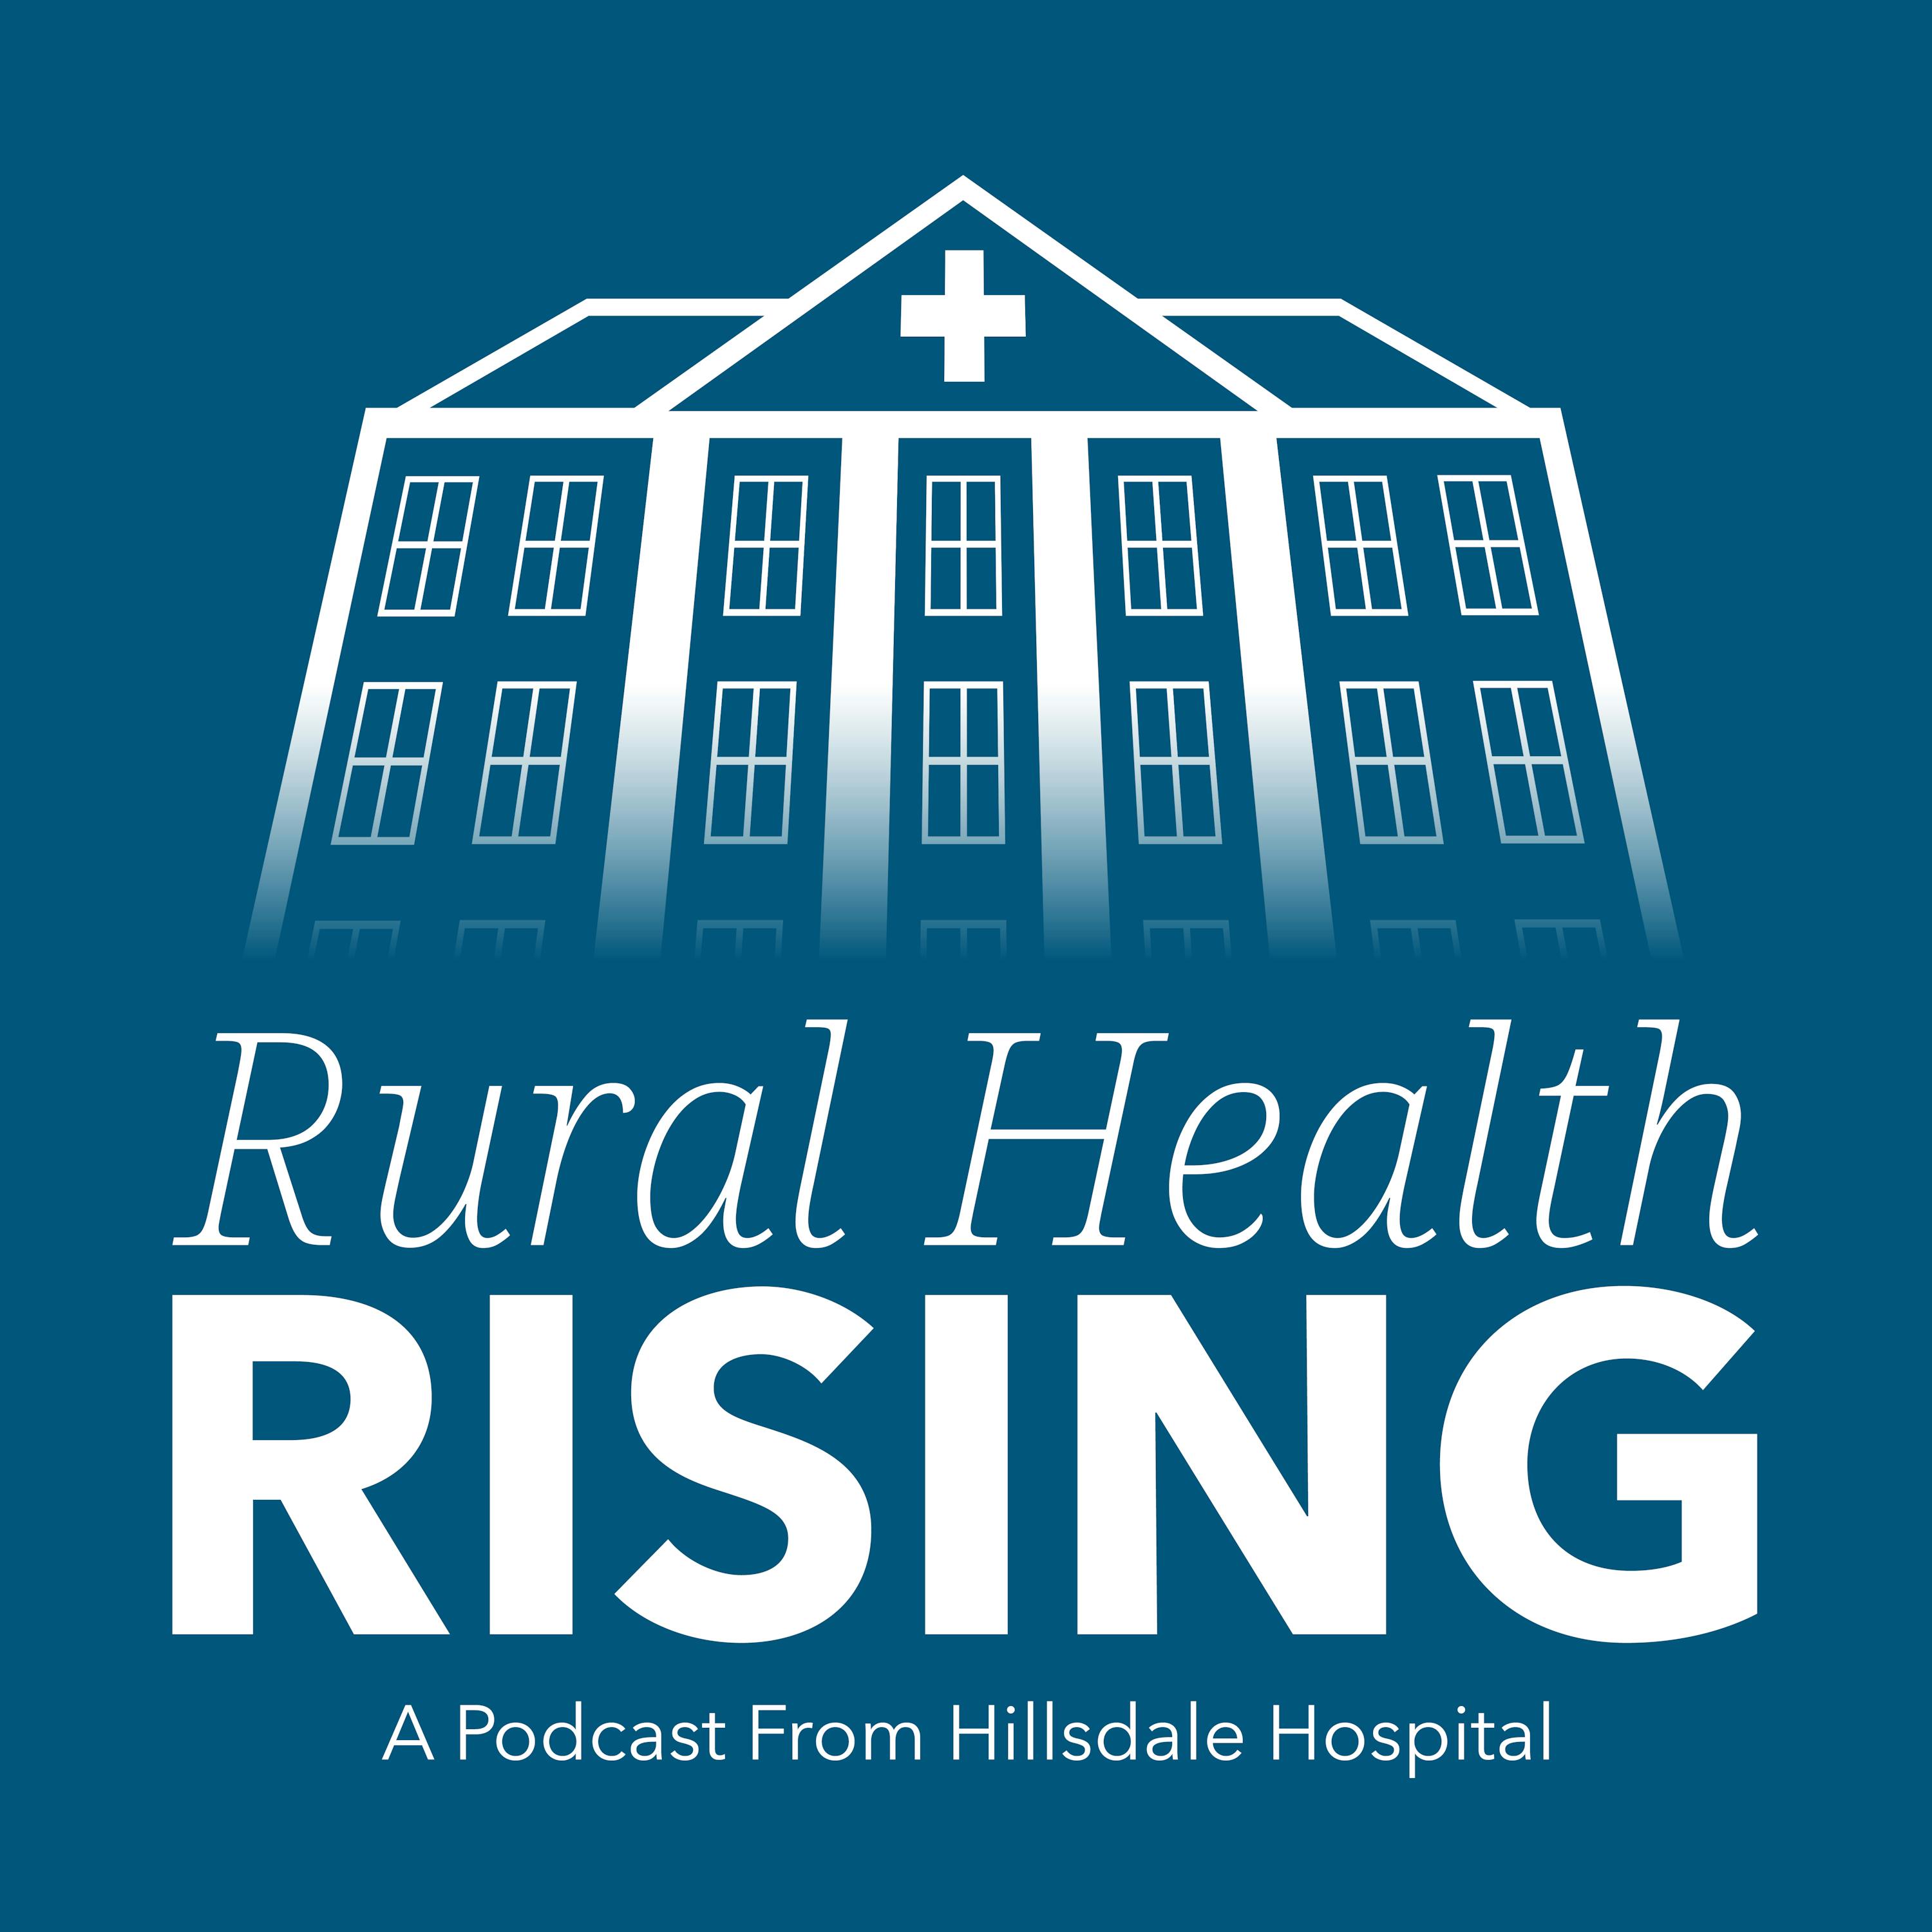 Episode 99: Farming & Food Insecurity in Rural America